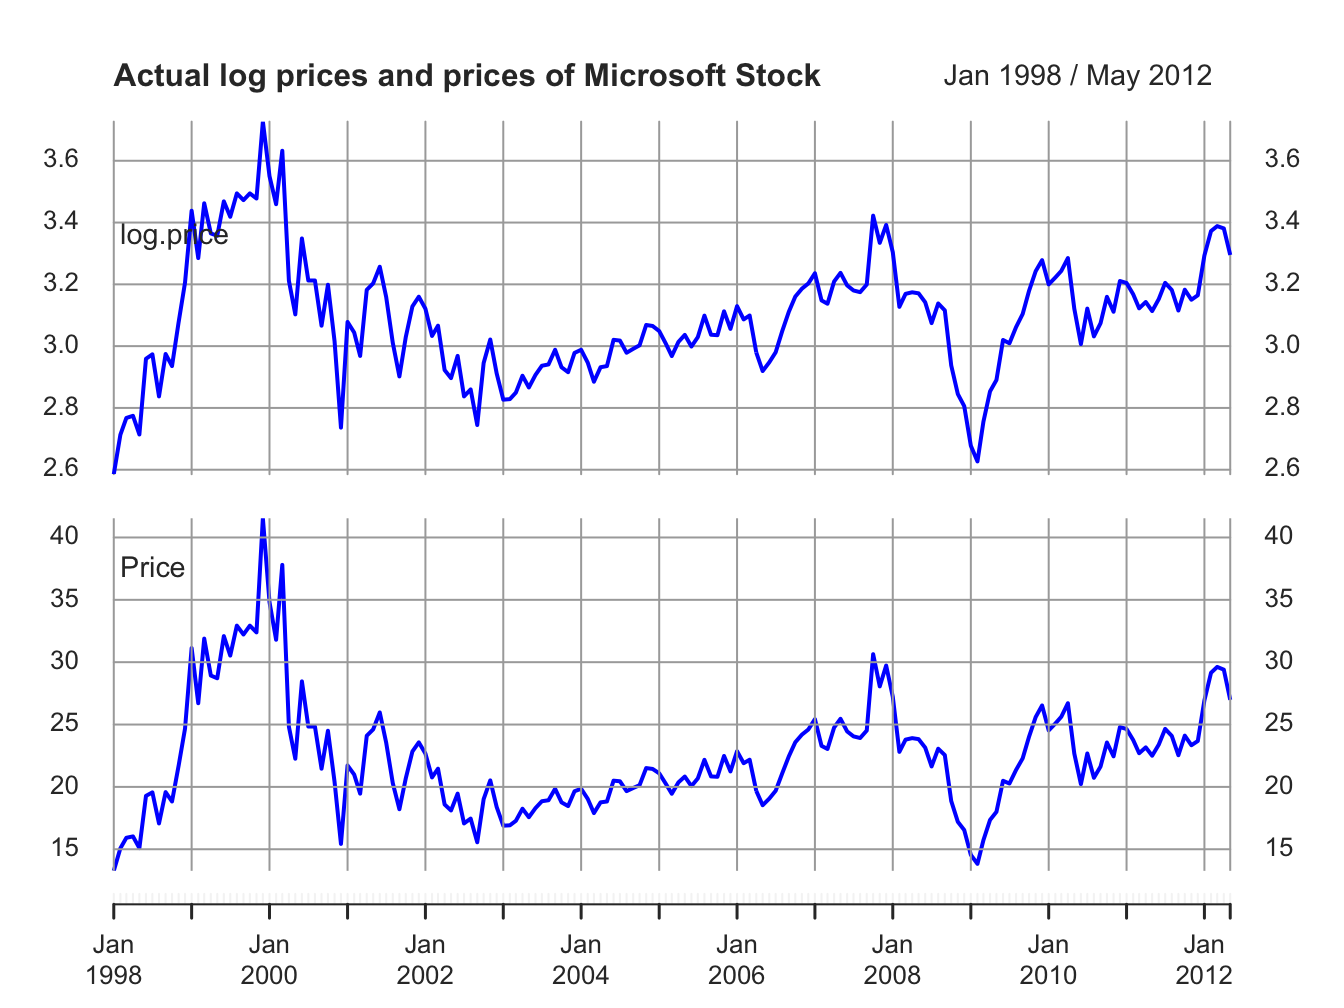 Top panel: Actual log monthly prices of Microsoft. Bottom panel: Actual monthly prices of Microsoft stock.